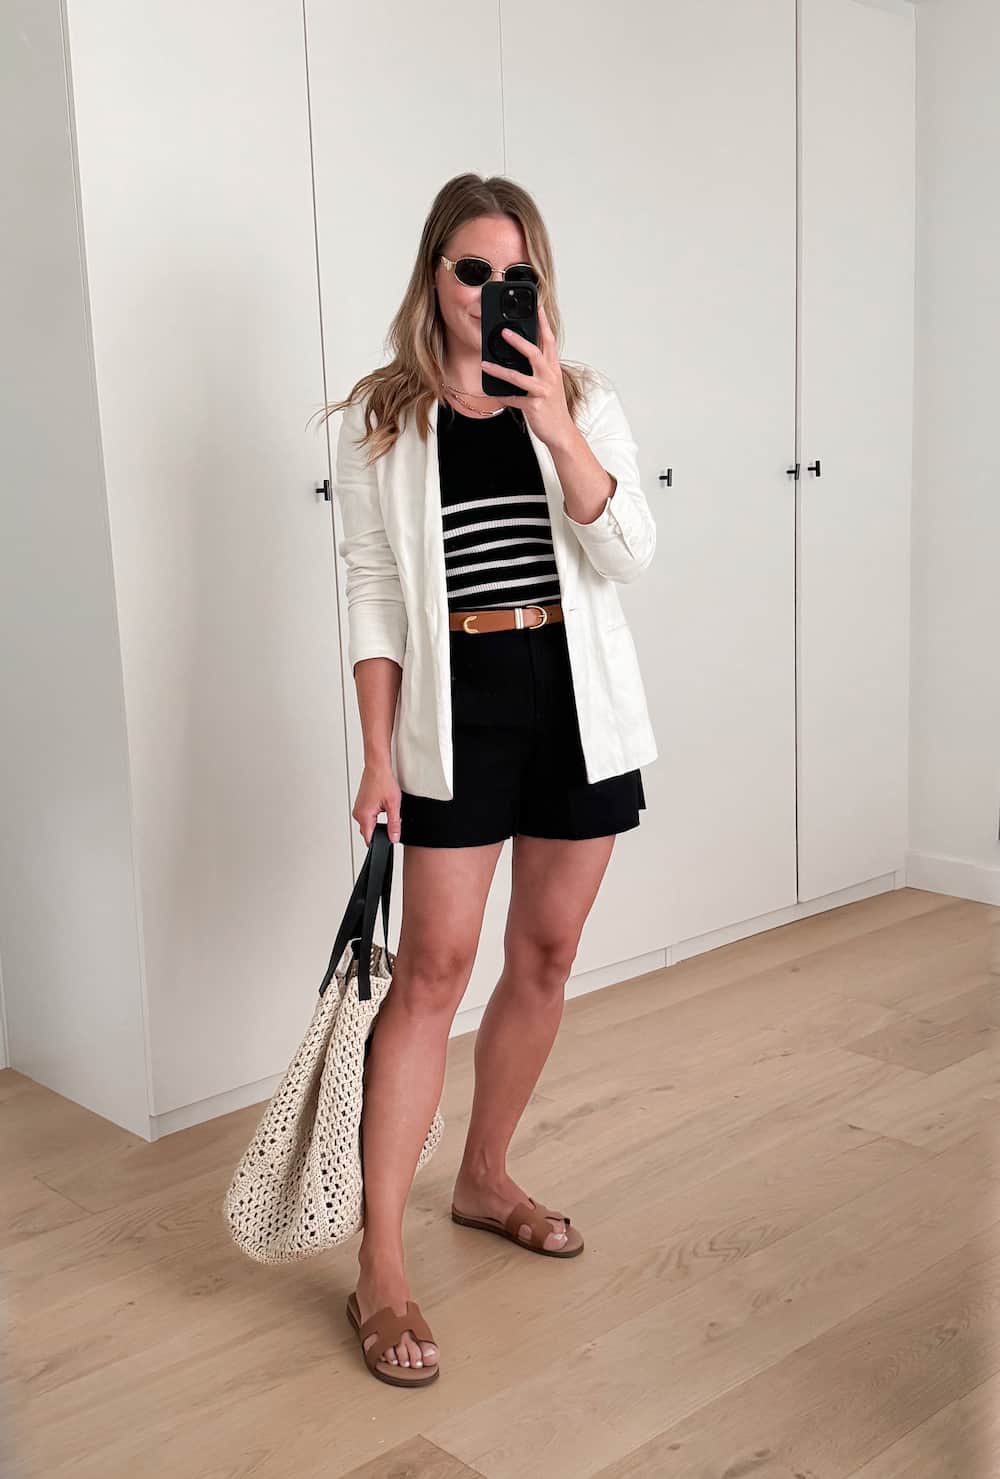 Christal wearing black shorts, a black and white striped sweater, a white blazer and tan sandals.